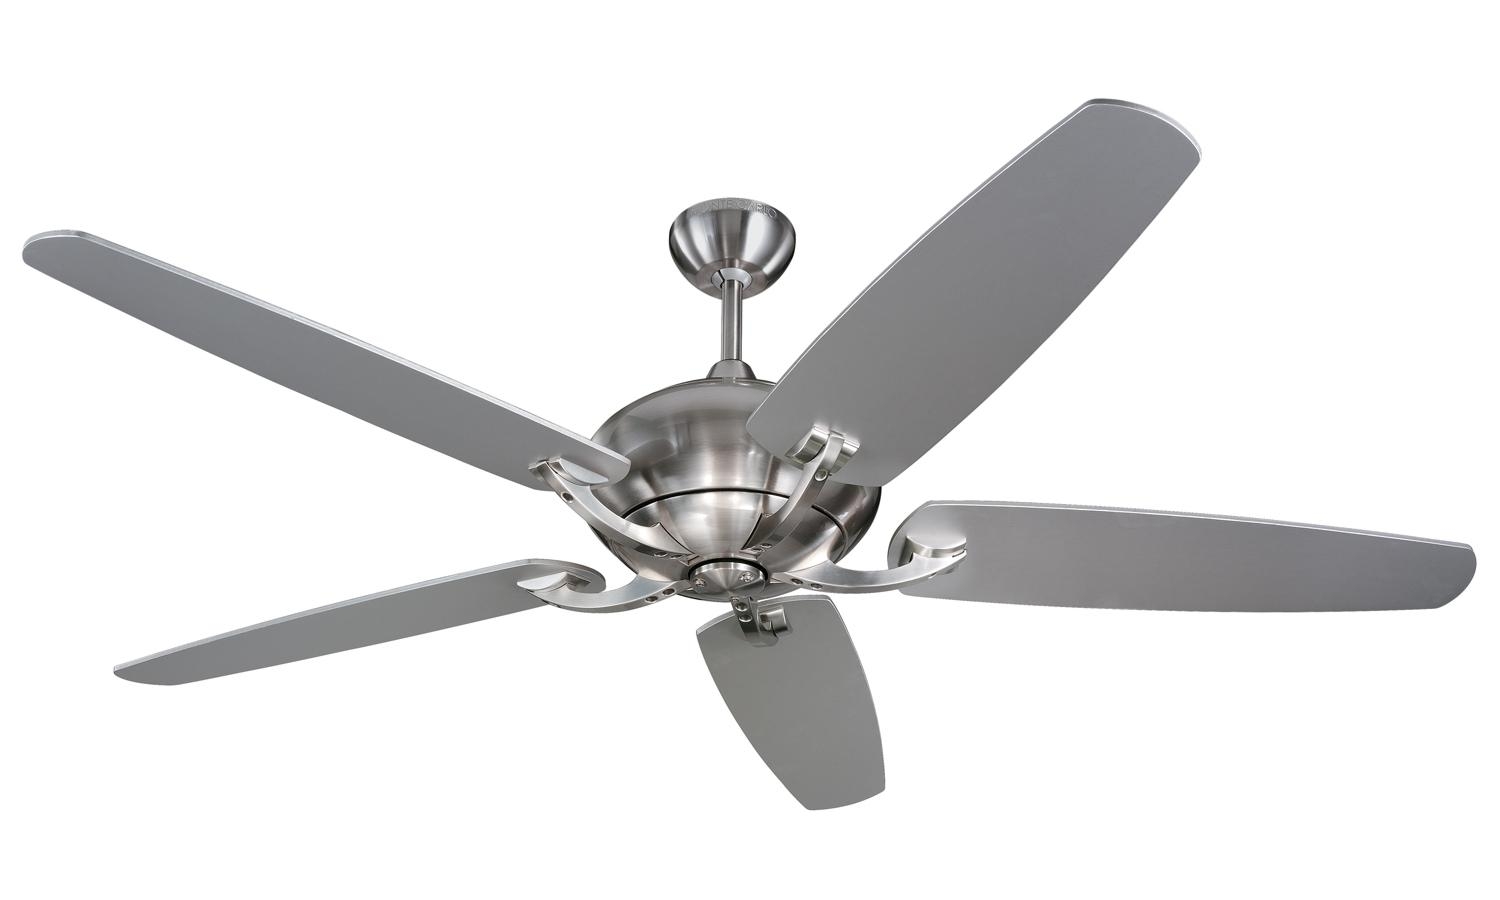 Large Ceiling Fan Without Lightlighting design ideas outdoor ceiling fans without lights in